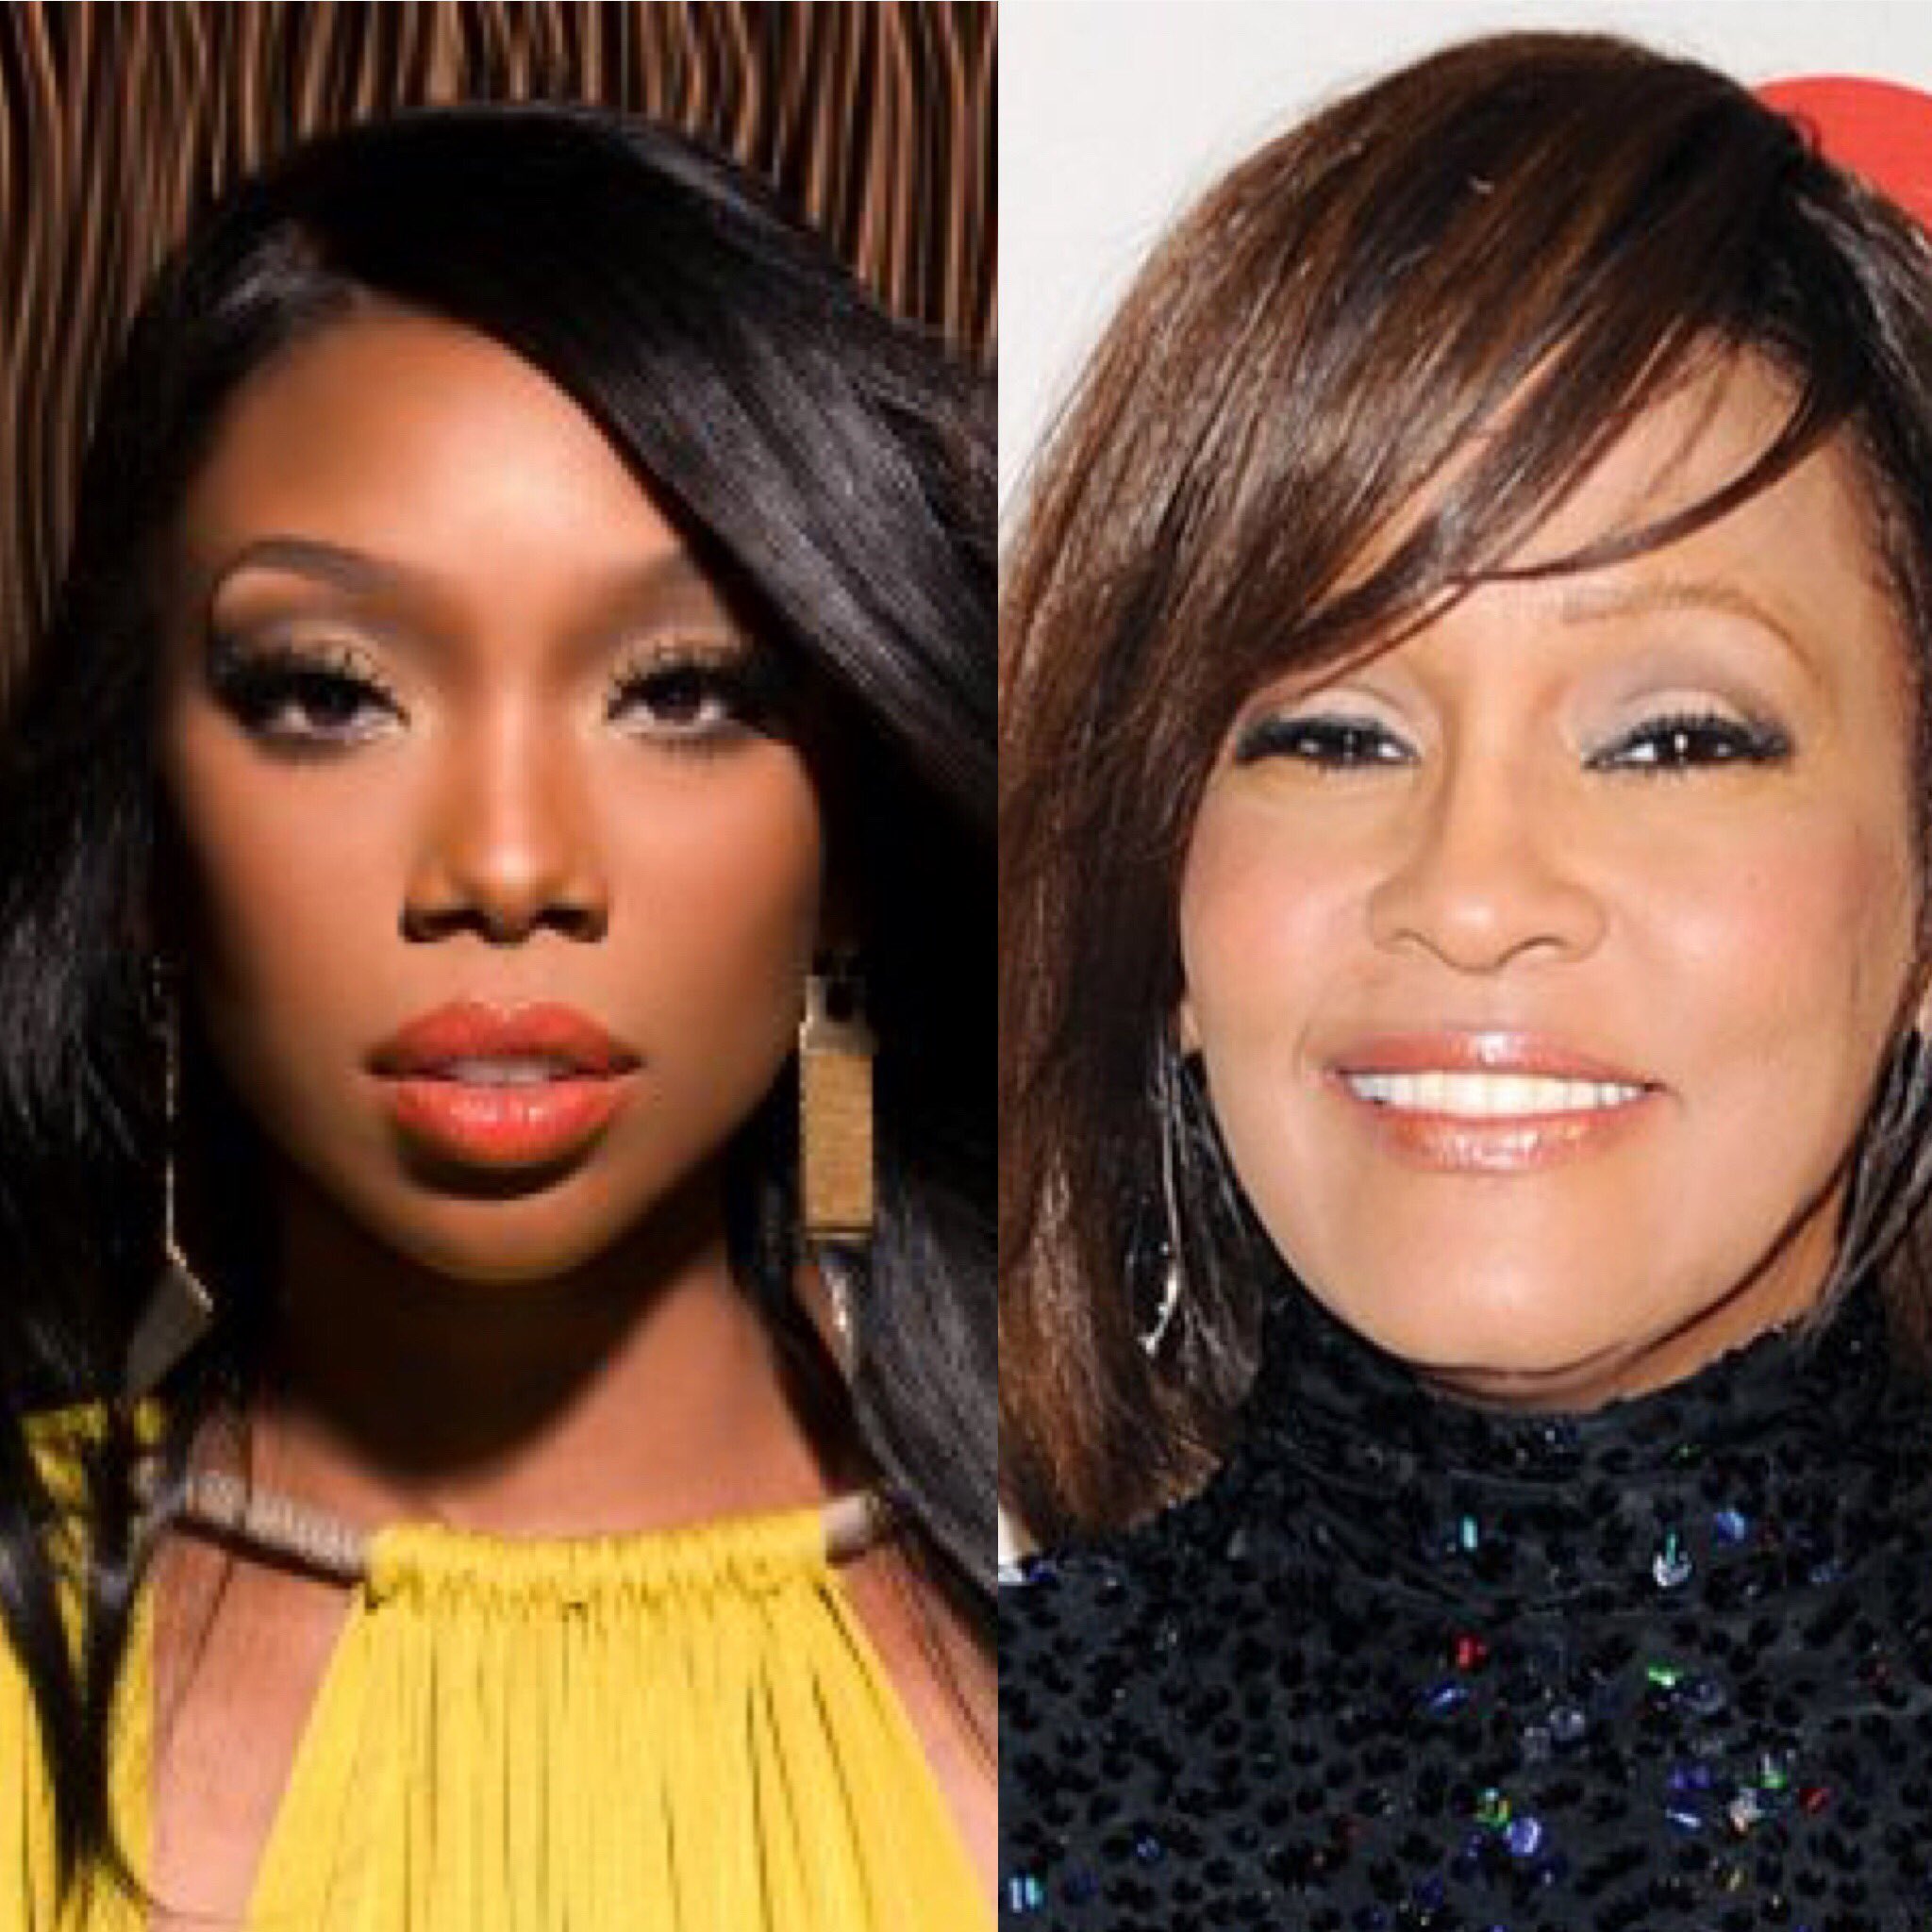 Weird fact... On this day the 11th February Happy birthday Brandy Norwood. 
On this day 2012 R.I.P +Whitney Houston. 